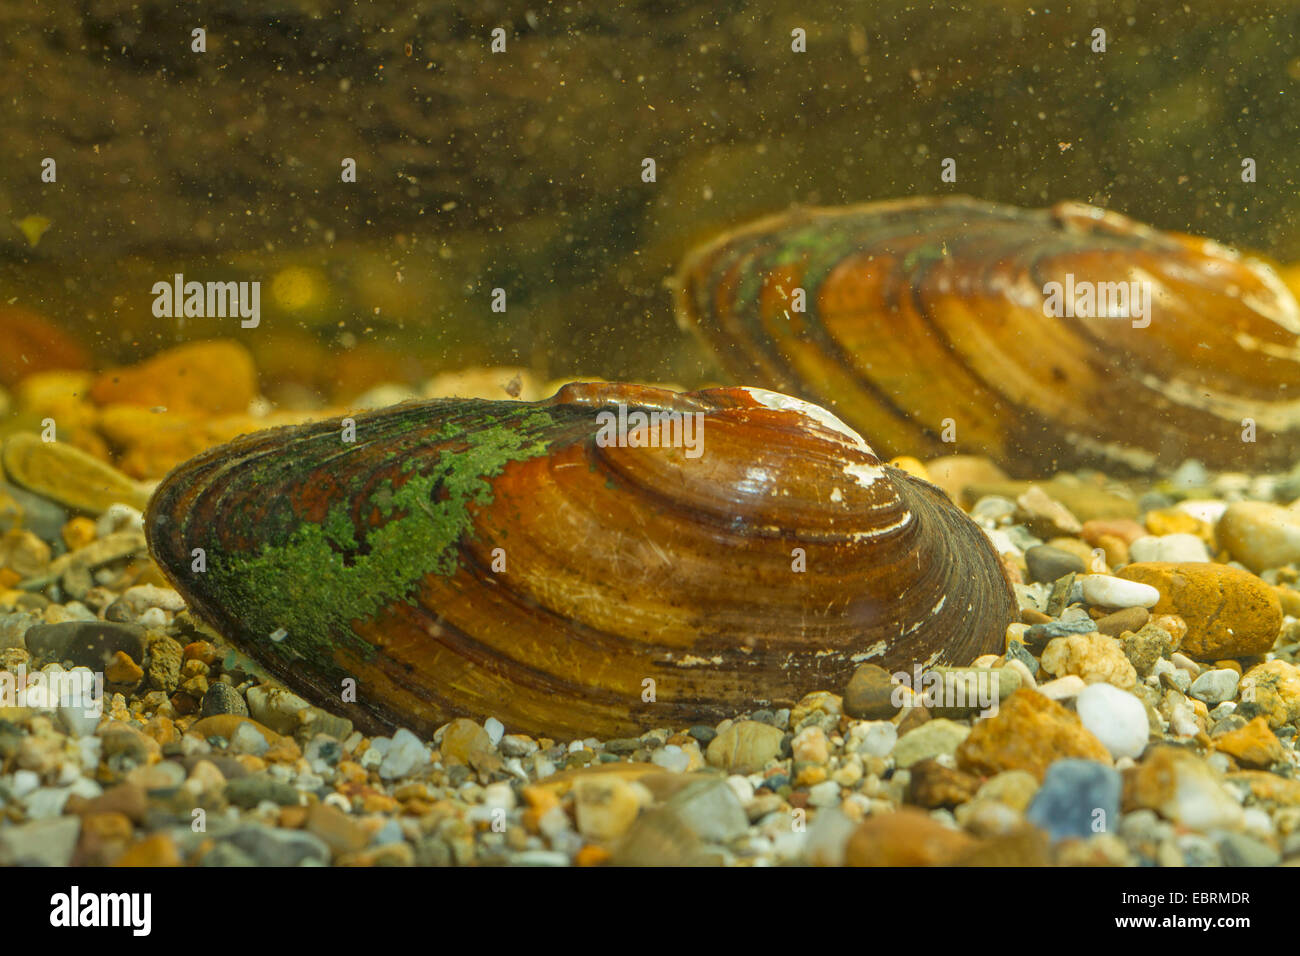 swollen river mussel (Unio tumidus), two mussels on the ground, Germany Stock Photo